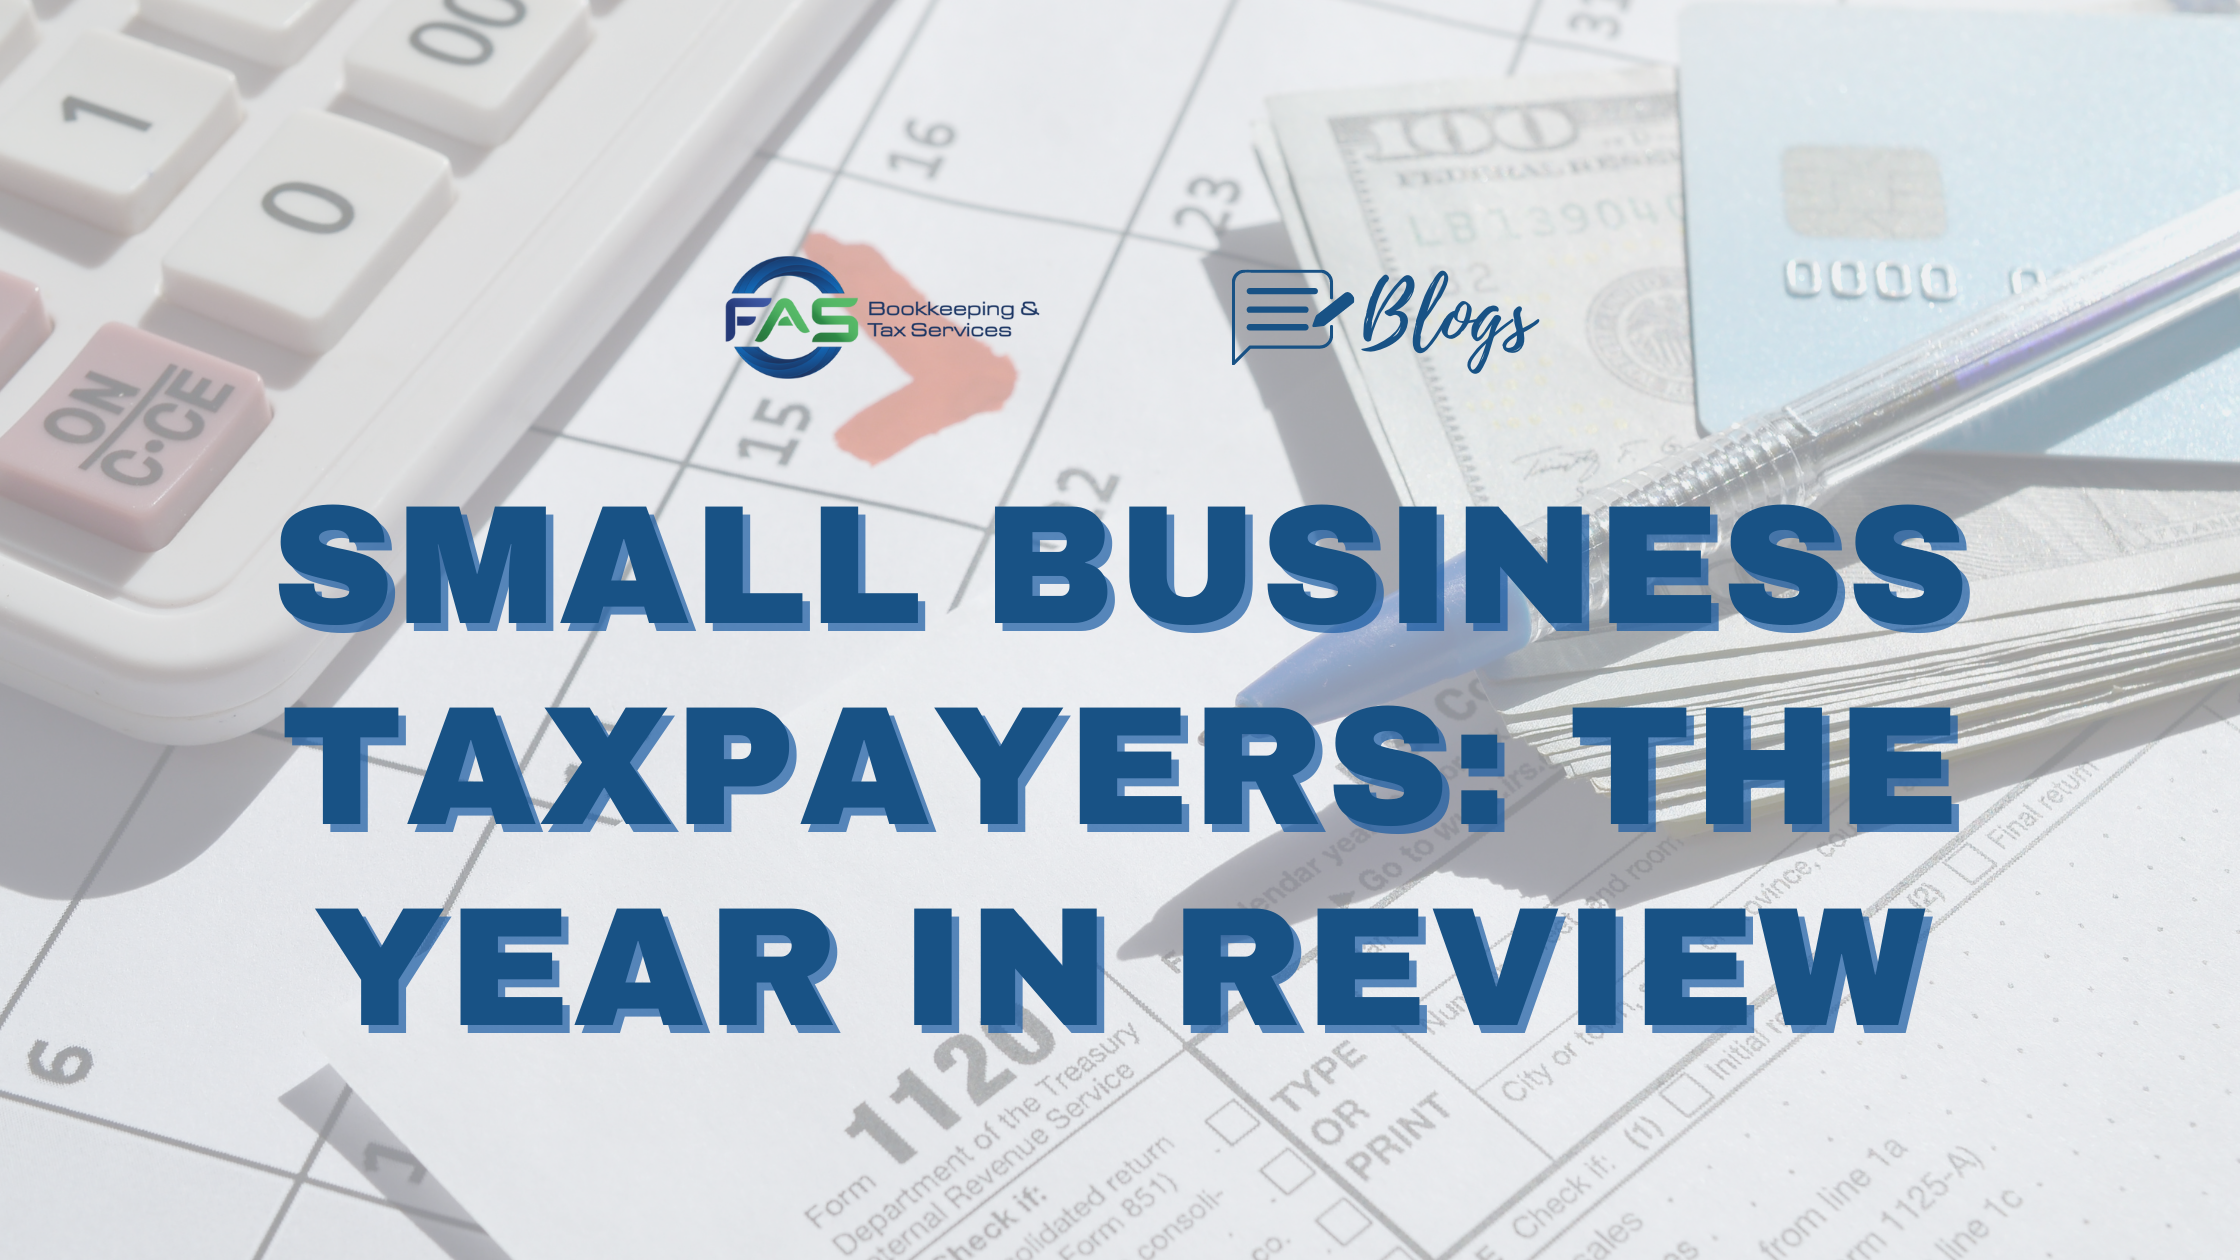 Small Business Taxpayers: The Year in Review